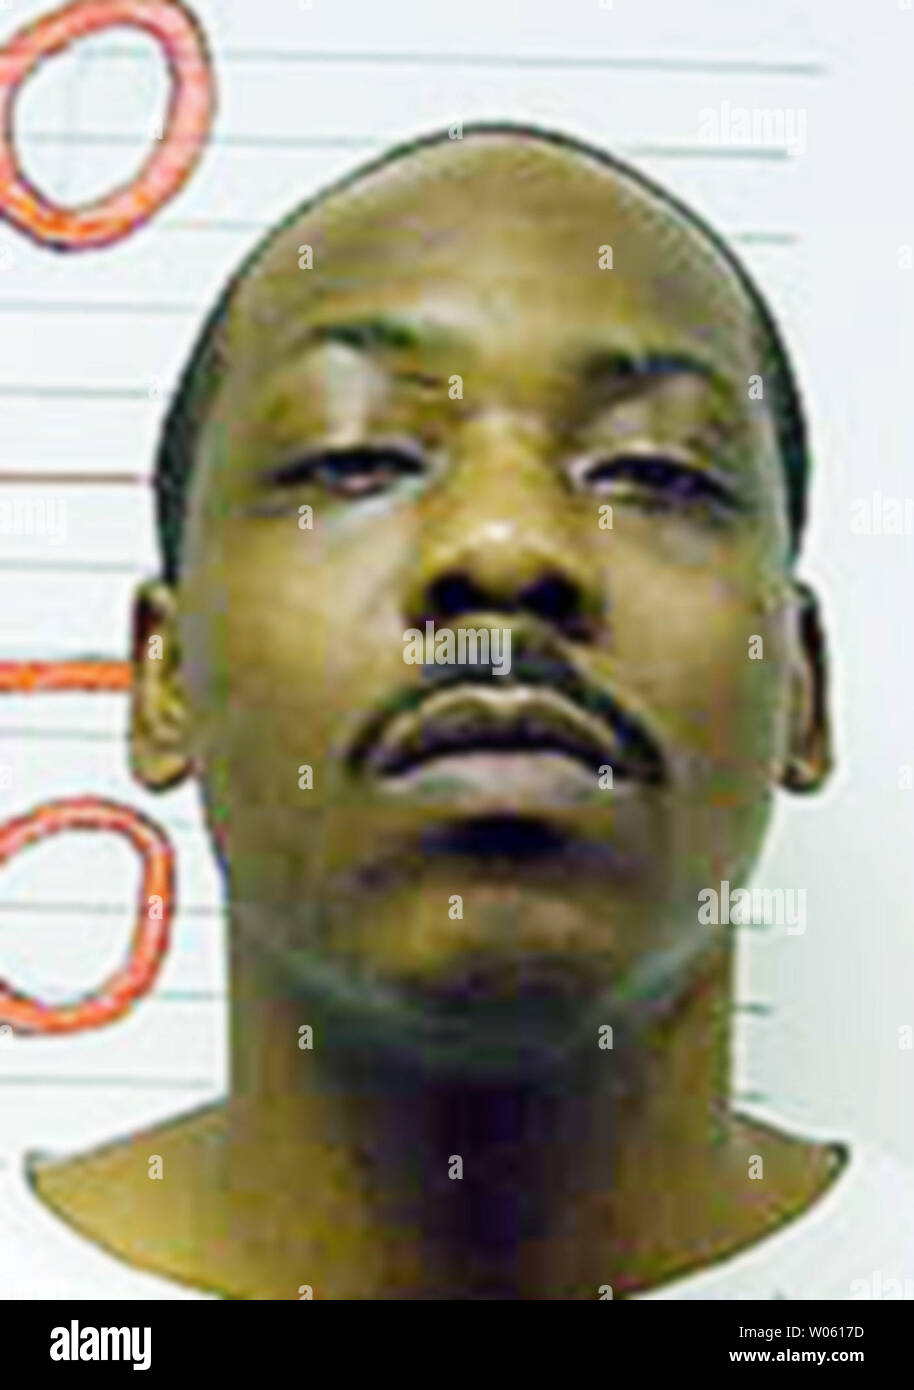 The Missouri Supreme Court has set a April 27 execution date for Donald Jones, 28 convicted of the Martch 1993 stabbing death of his grandmother in St. Louis after she refused to give him money to buy drugs, in Jefferson City on March 28, 2005. A St. Louis City Circut Court jury found Jones guilty of first degree murder on June 16, 1994 and sentenced him to death two days later. (UPI Photo/Missouri Department of Corections) Stock Photo